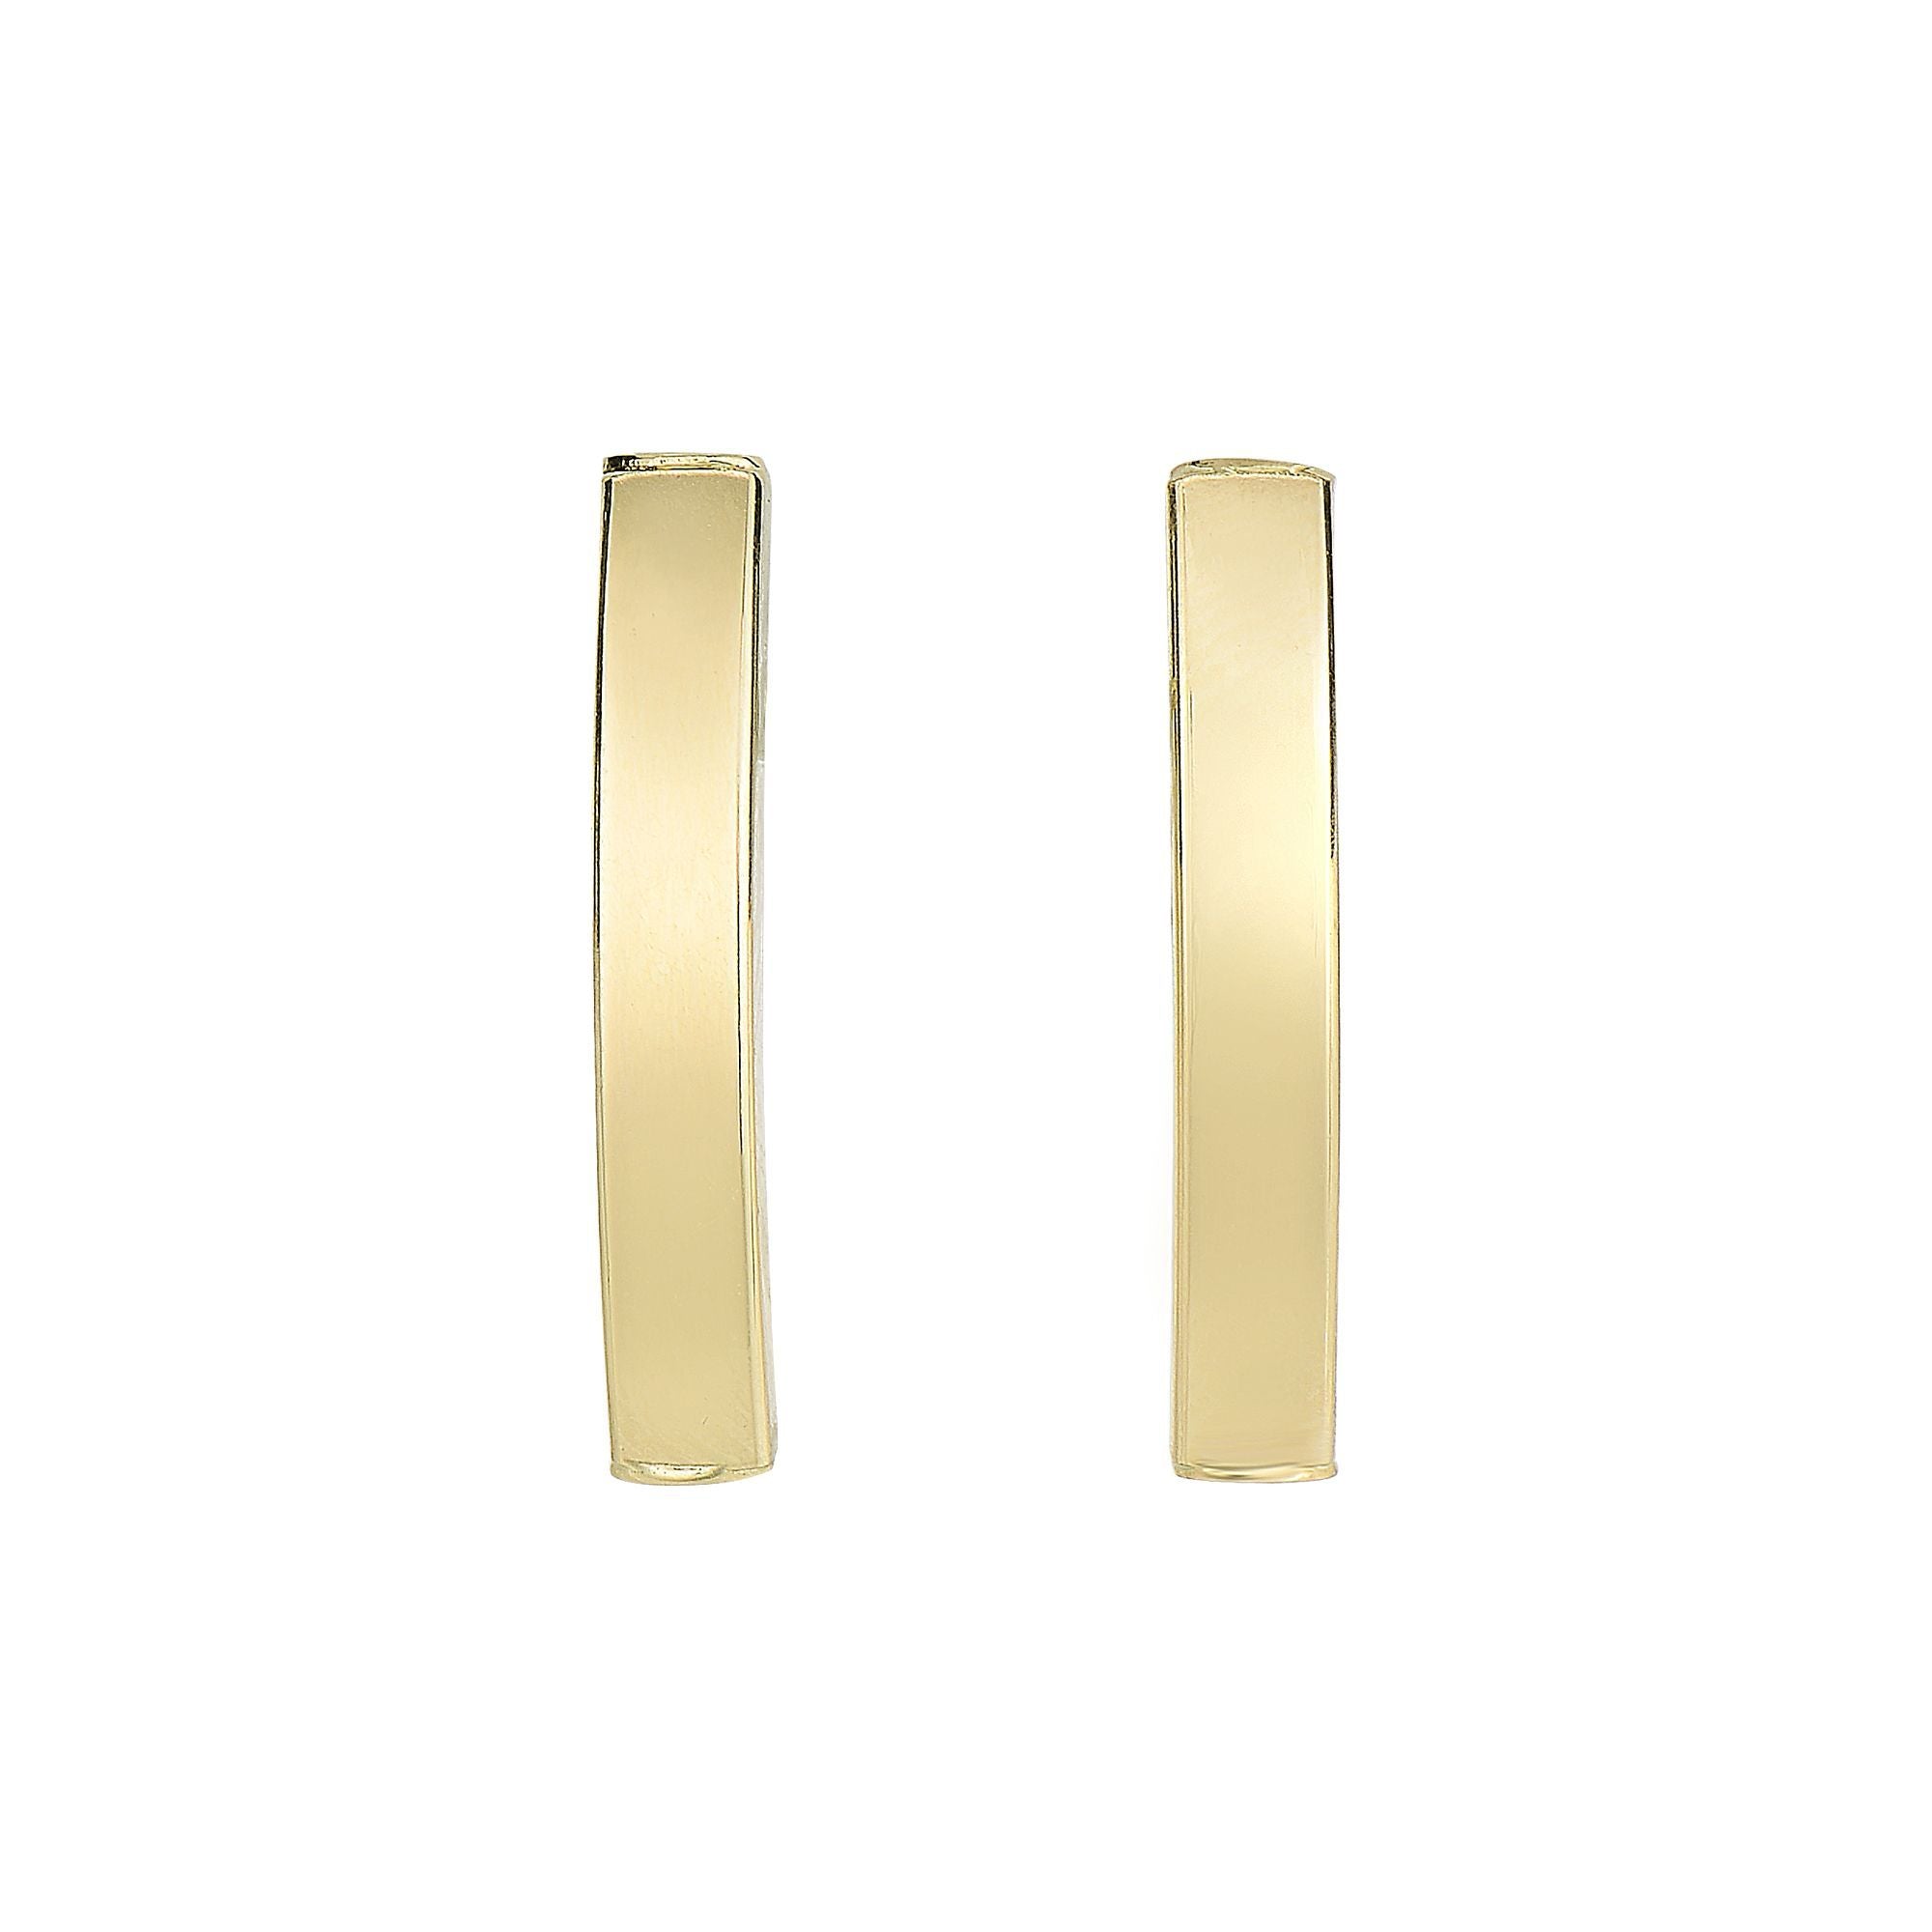 Minimalist Solid Gold Long Curve Bar Tube Fancy post Earrings with Push Back Clasp - wingroupjewelry